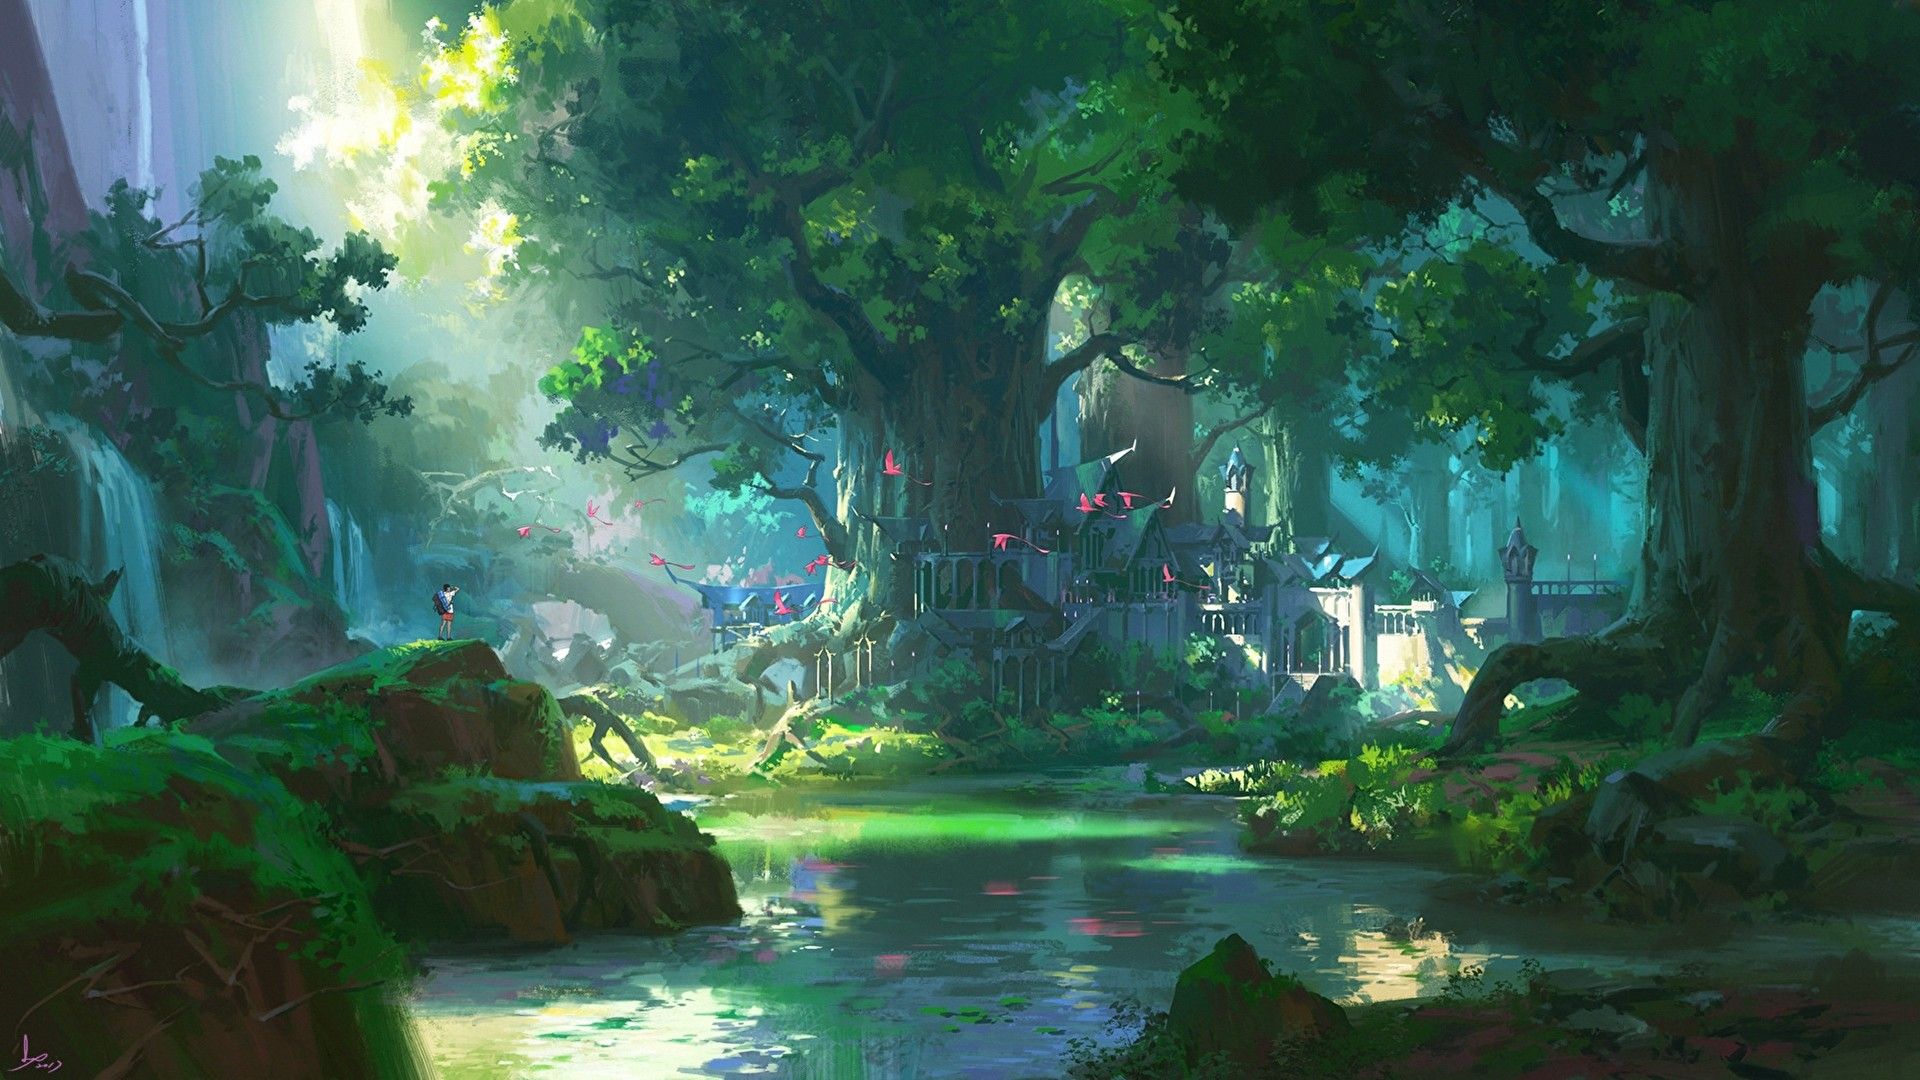 Free download Anime Forest Scenery 1920x1080 If you like anime